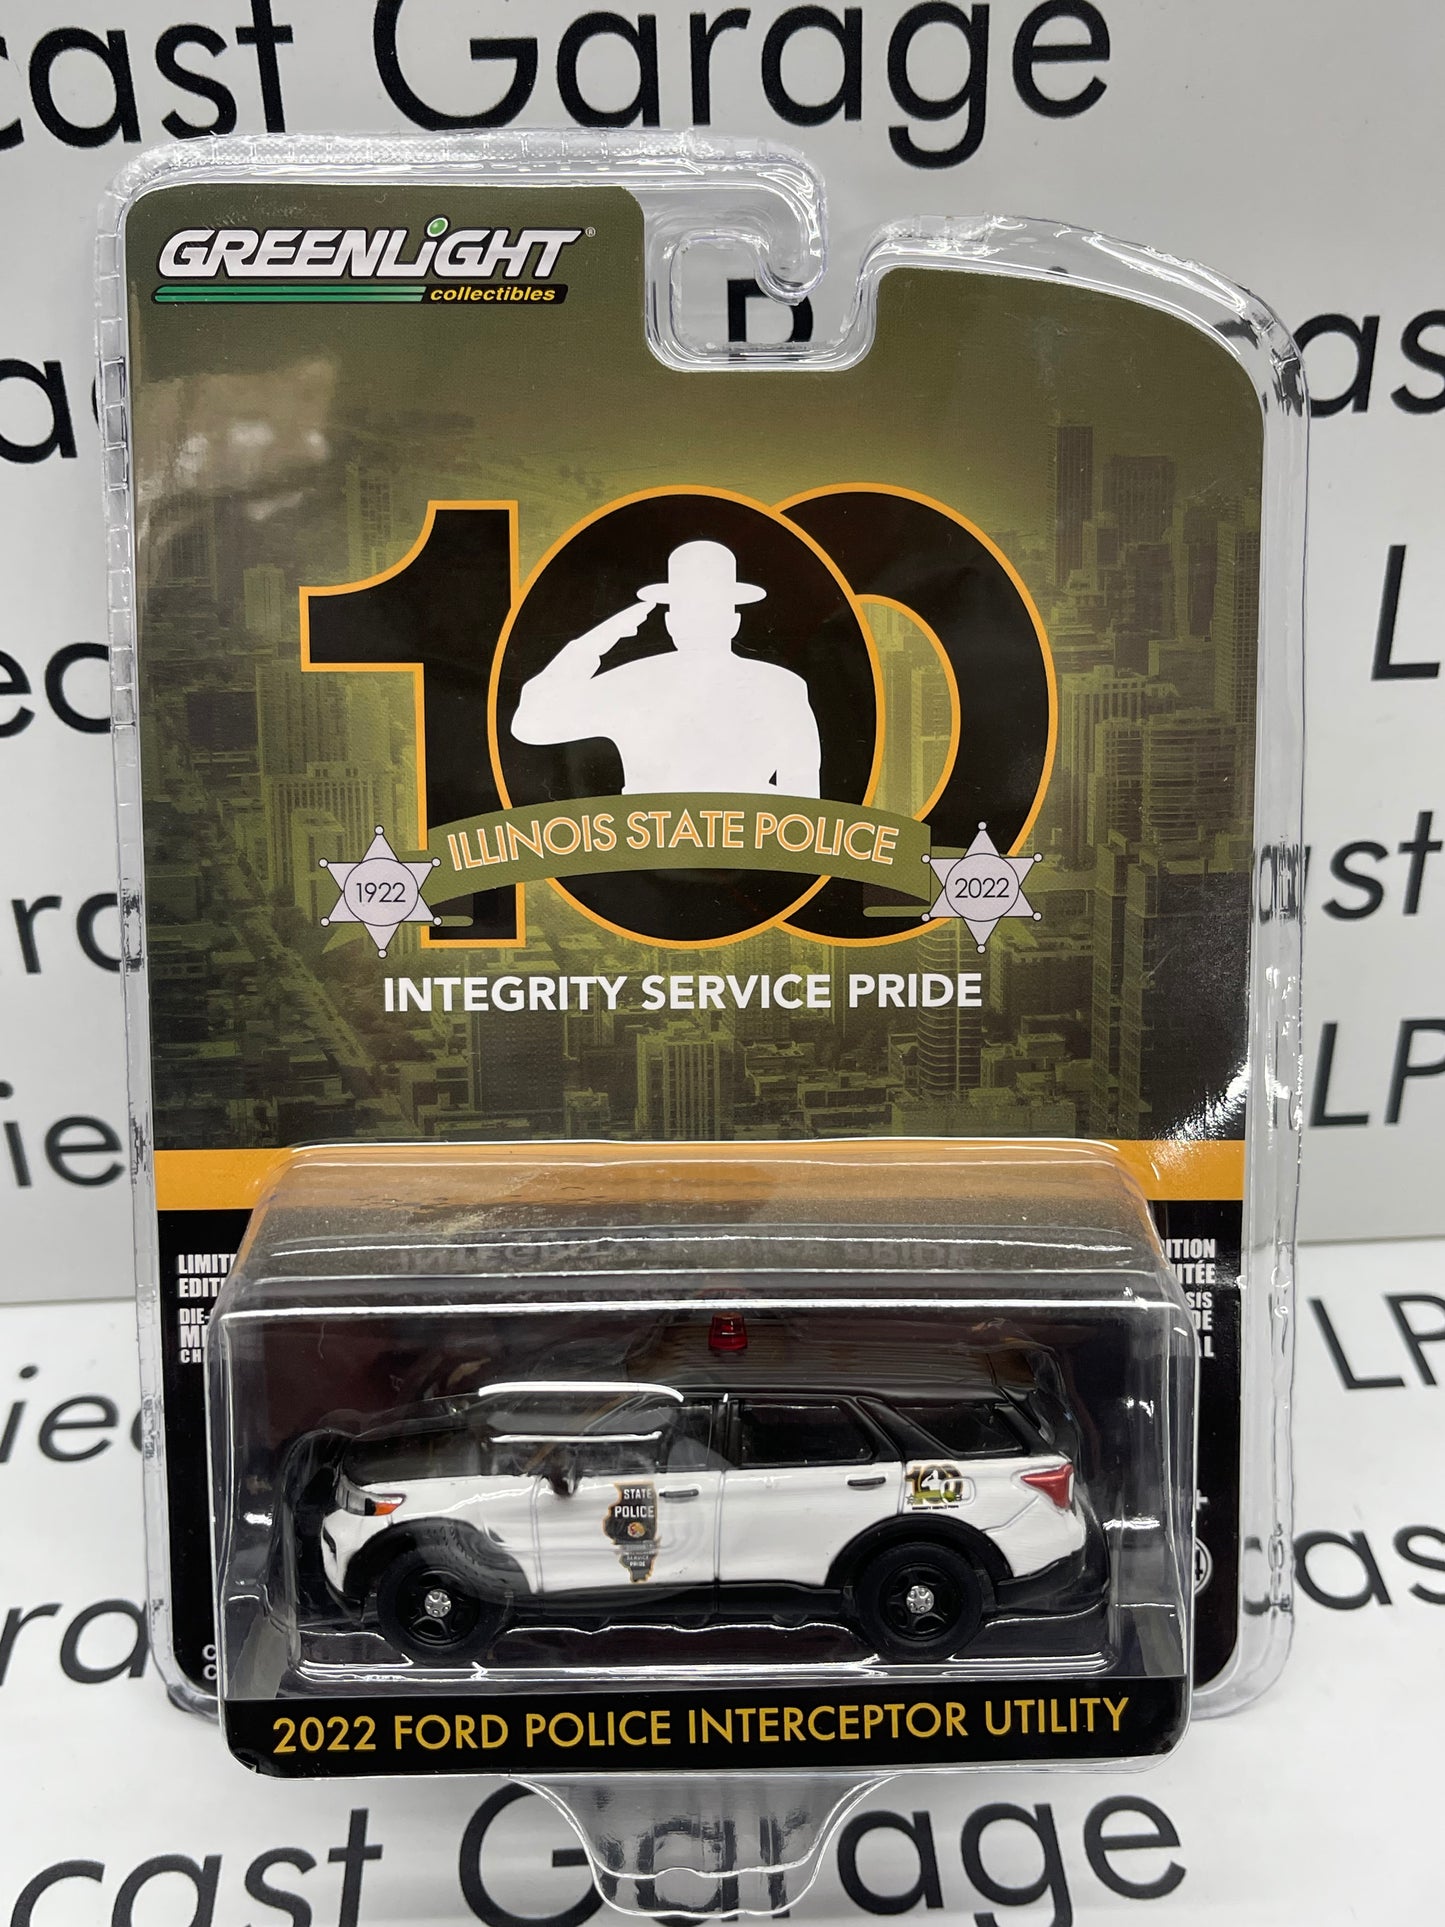 GREENLIGHT 2022 Ford Police interceptor Illinois State Police "100 Years" 1:64 Diecast